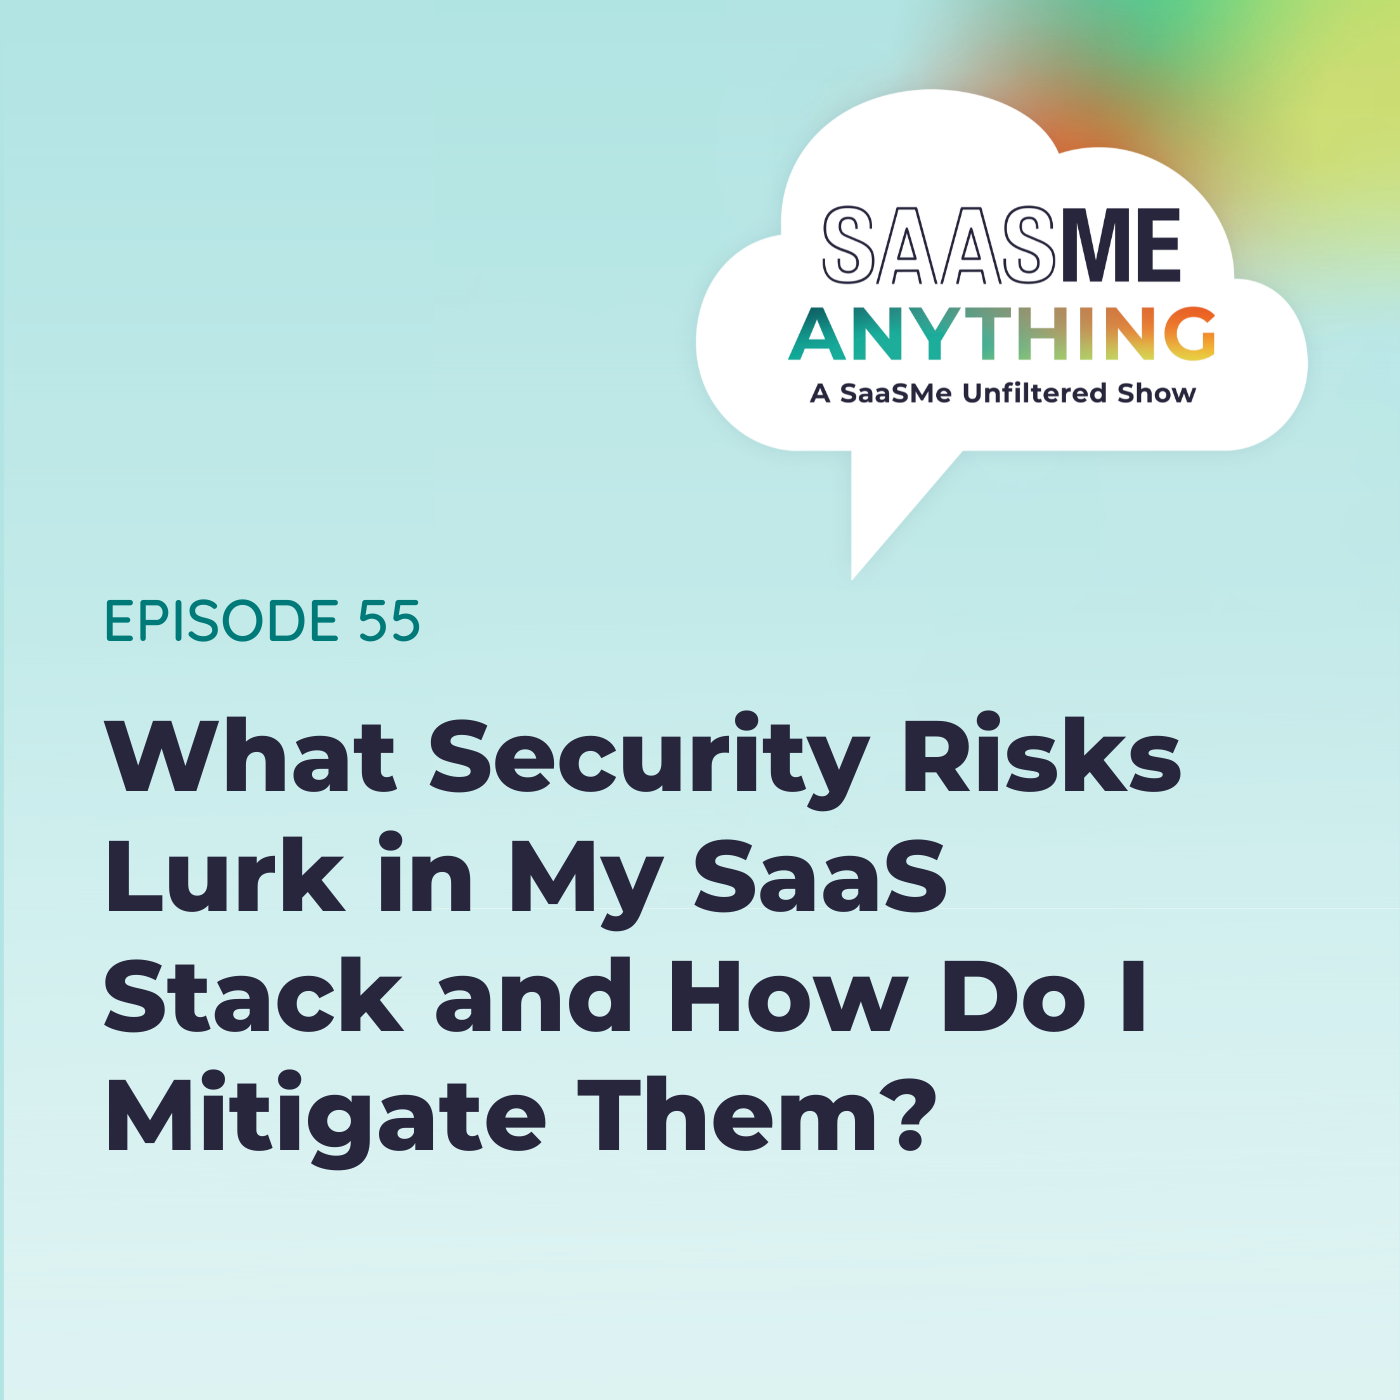 What Security Risks Lurk in My SaaS Stack and How Do I Mitigate Them?